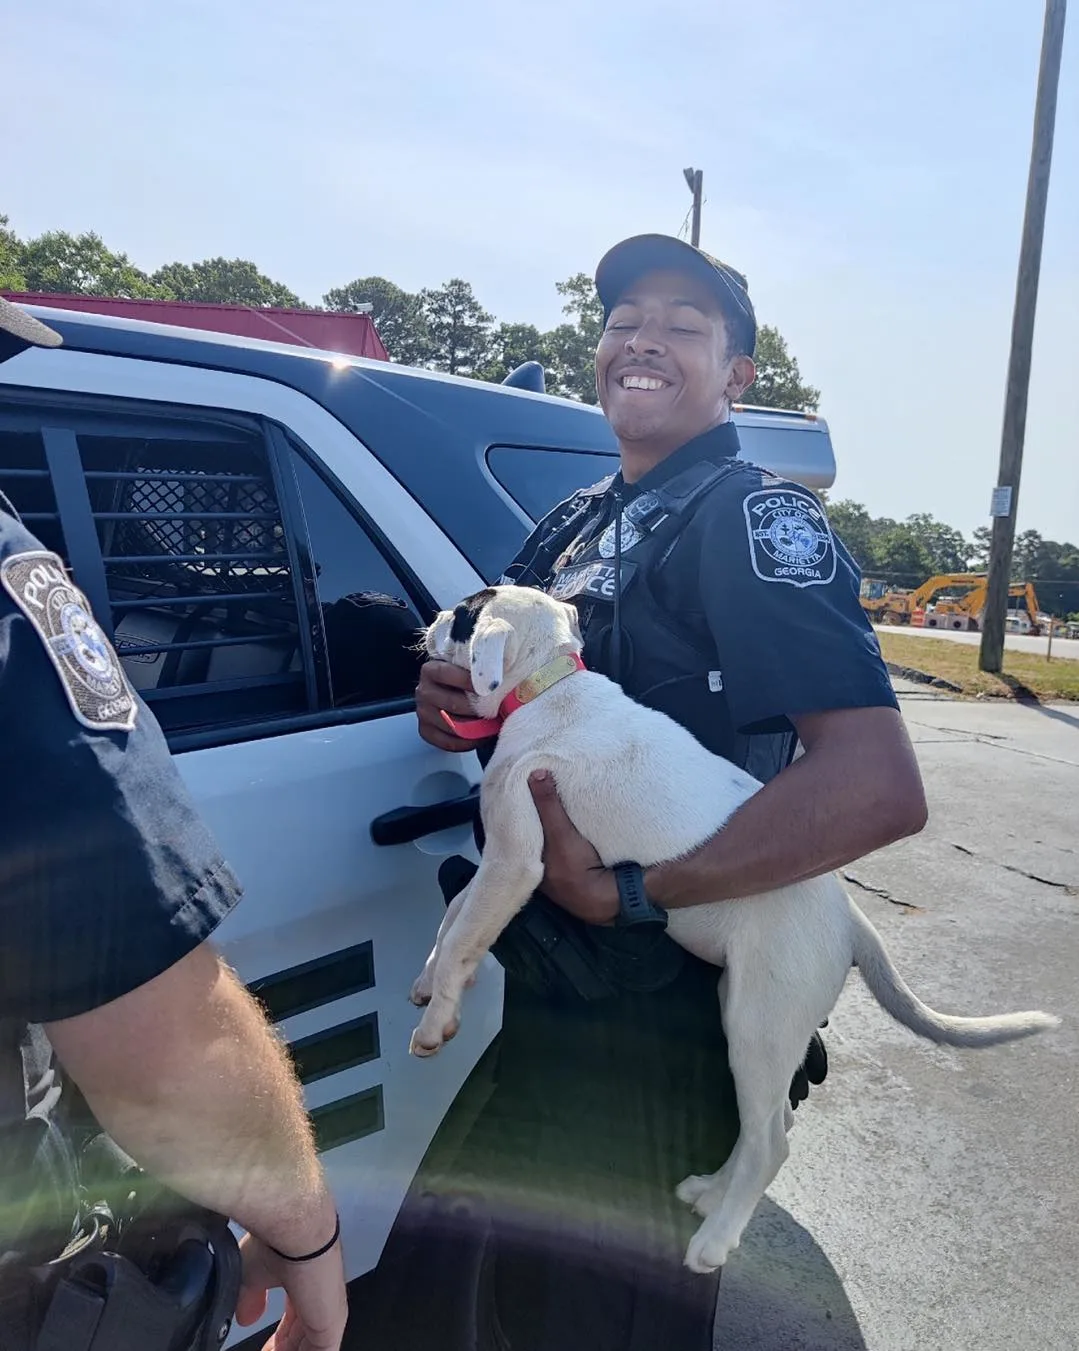 officer holding a puppy and standing next to a police car